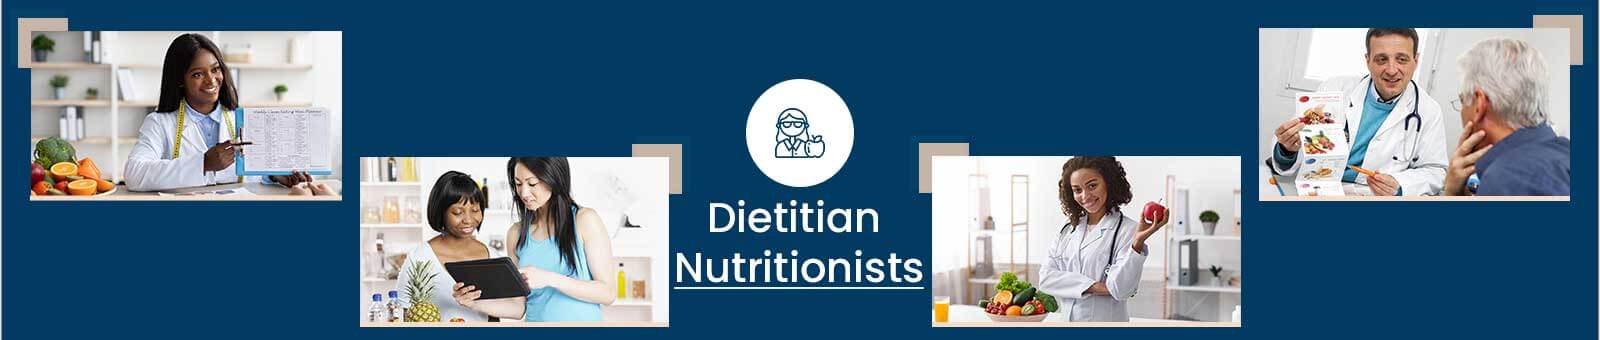 Dietitian / Nutritionists